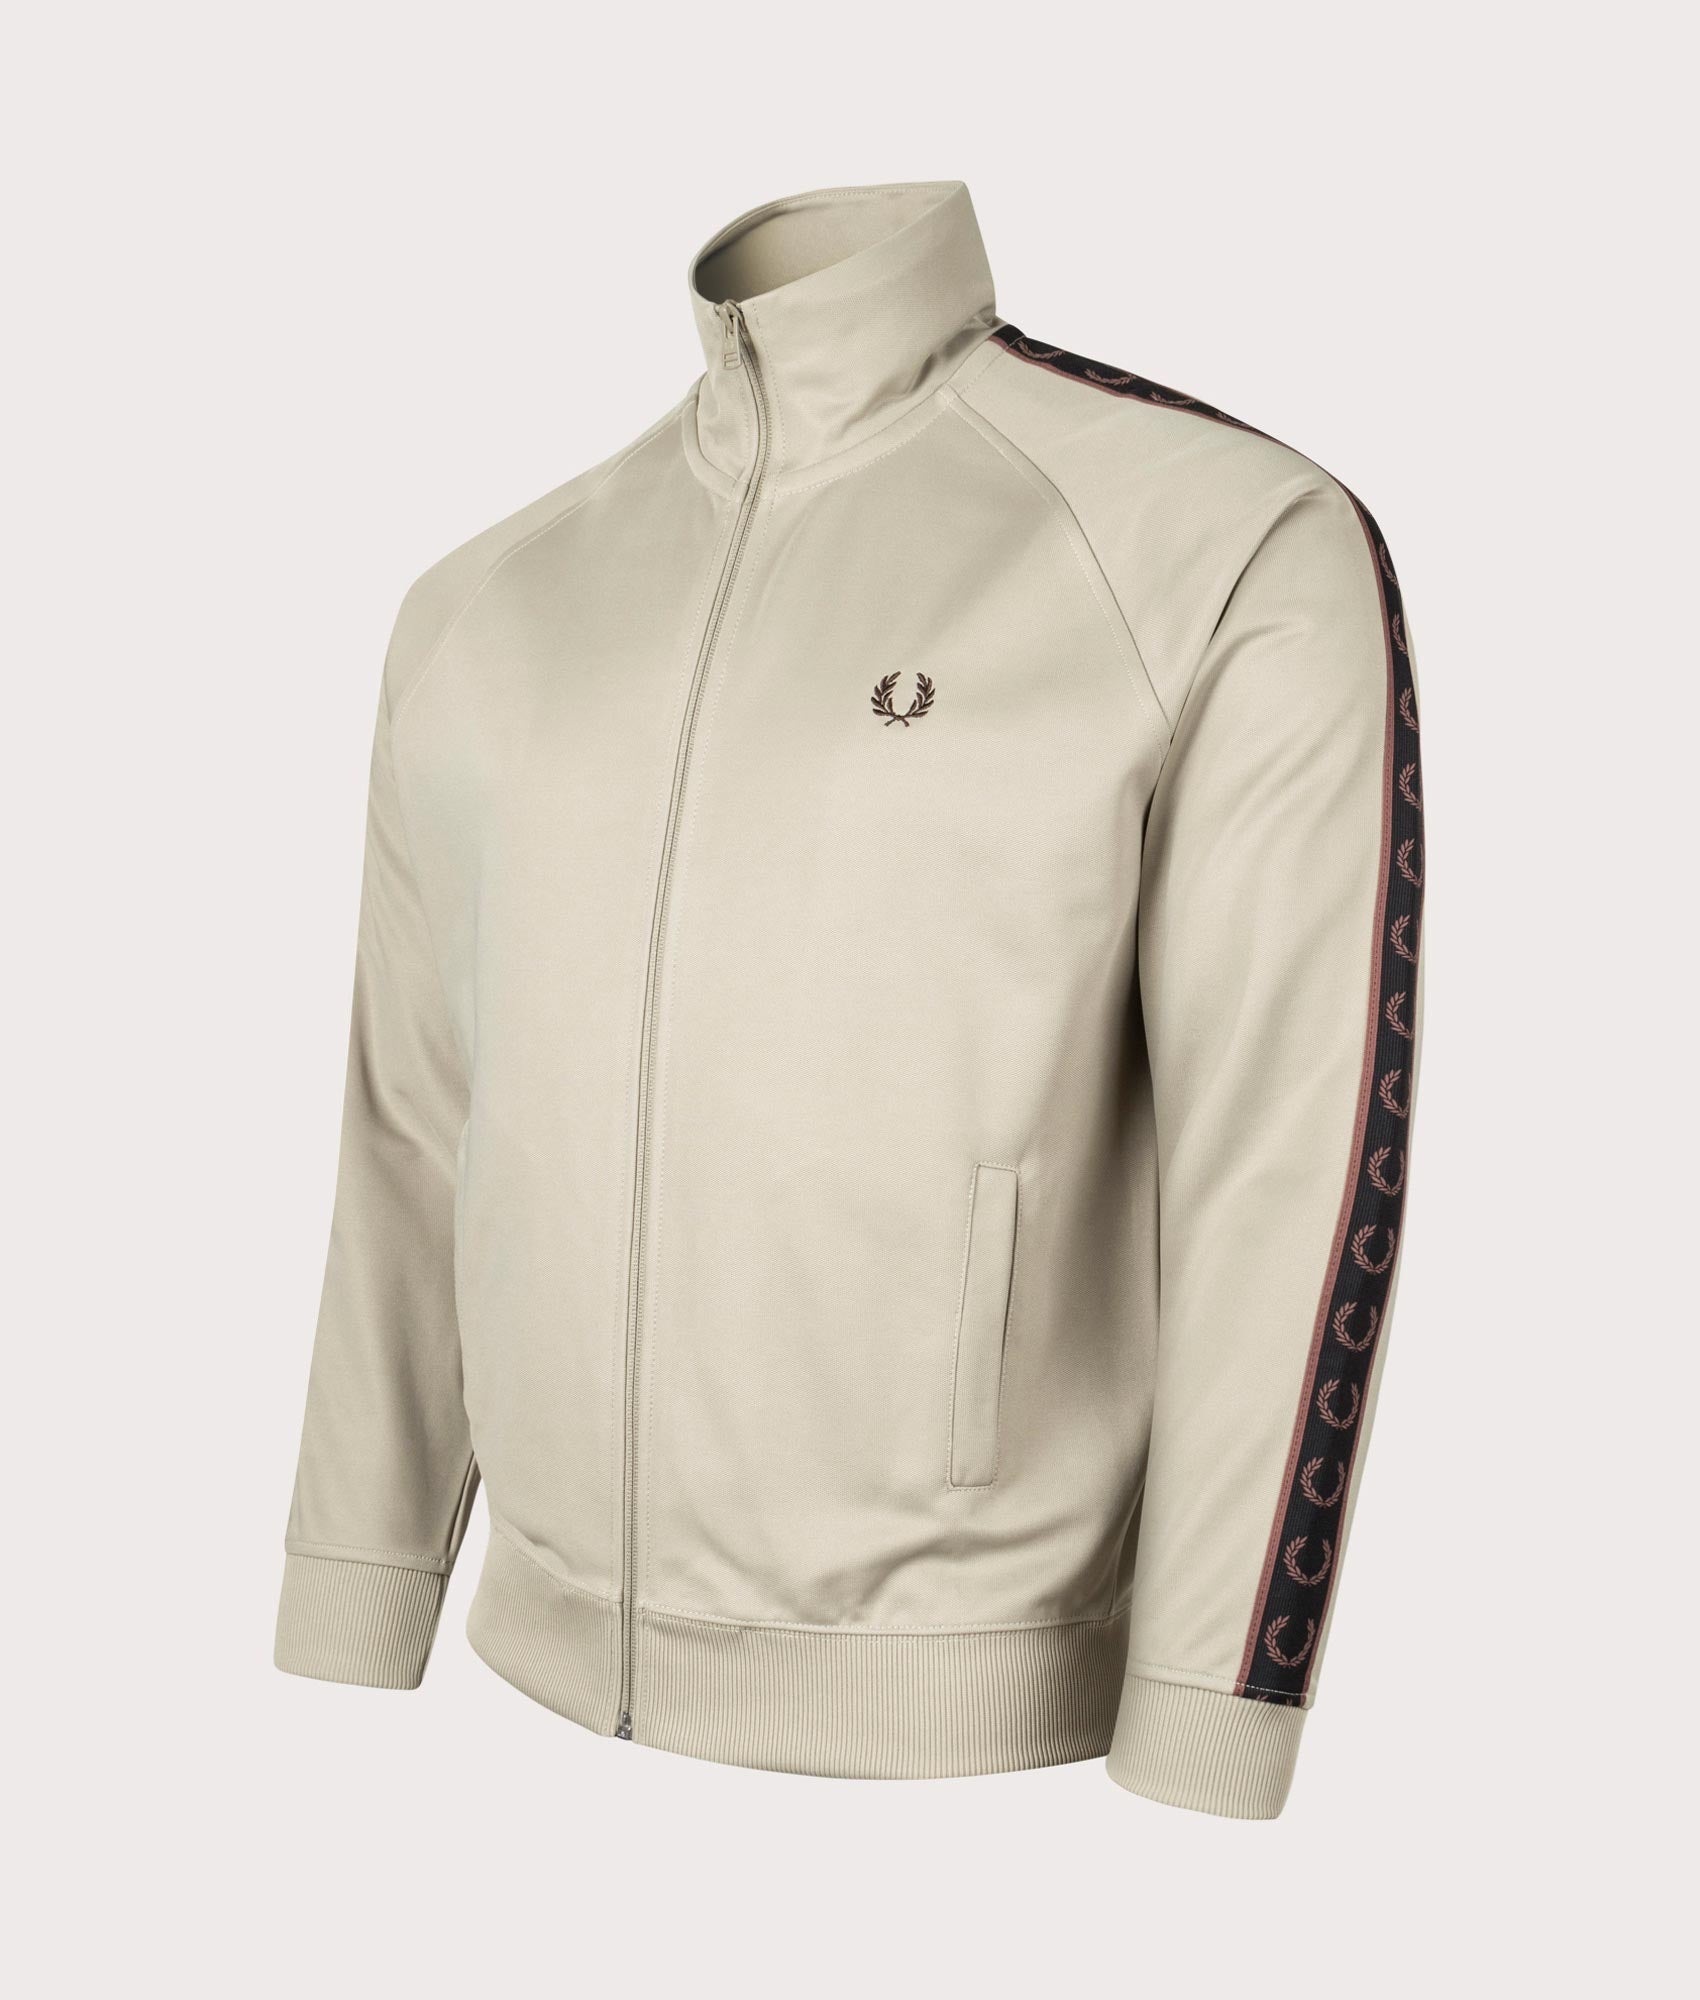 Fred Perry Mens Contrast Tape Track Top - Colour: U84 Warm Grey/Carrington Road Brick - Size: Large